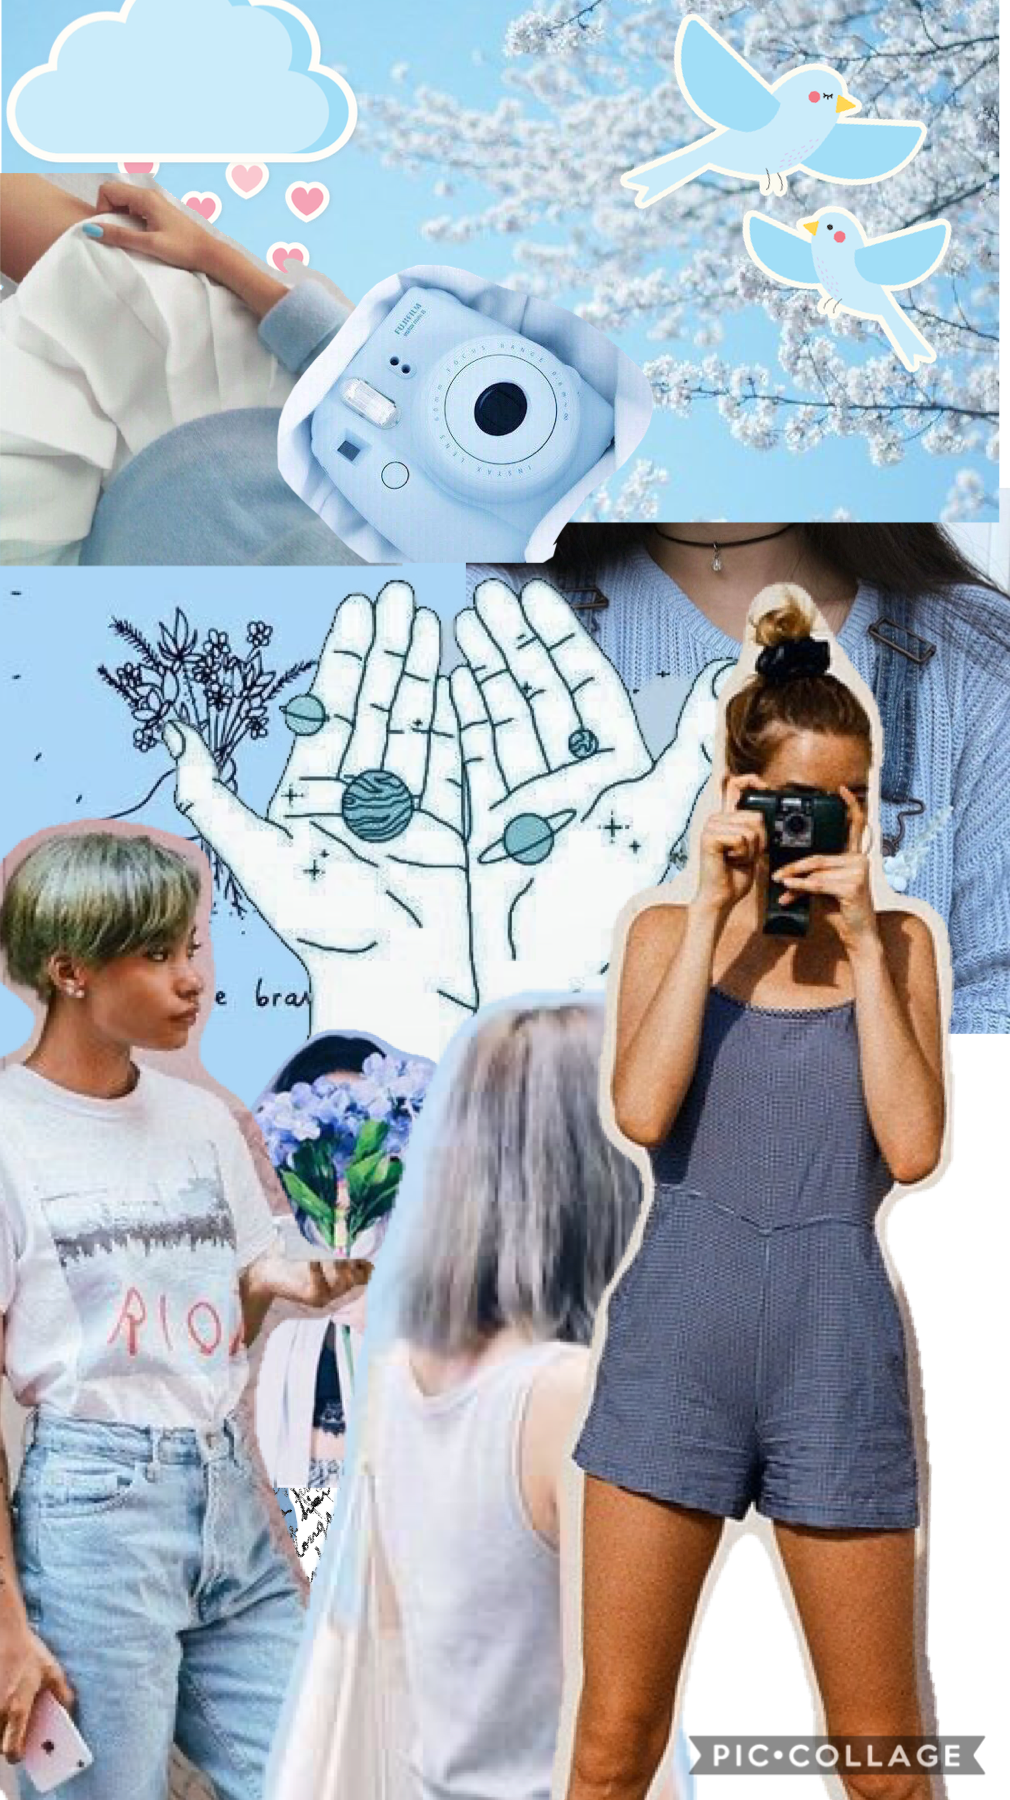 Collage by charliaeathetic